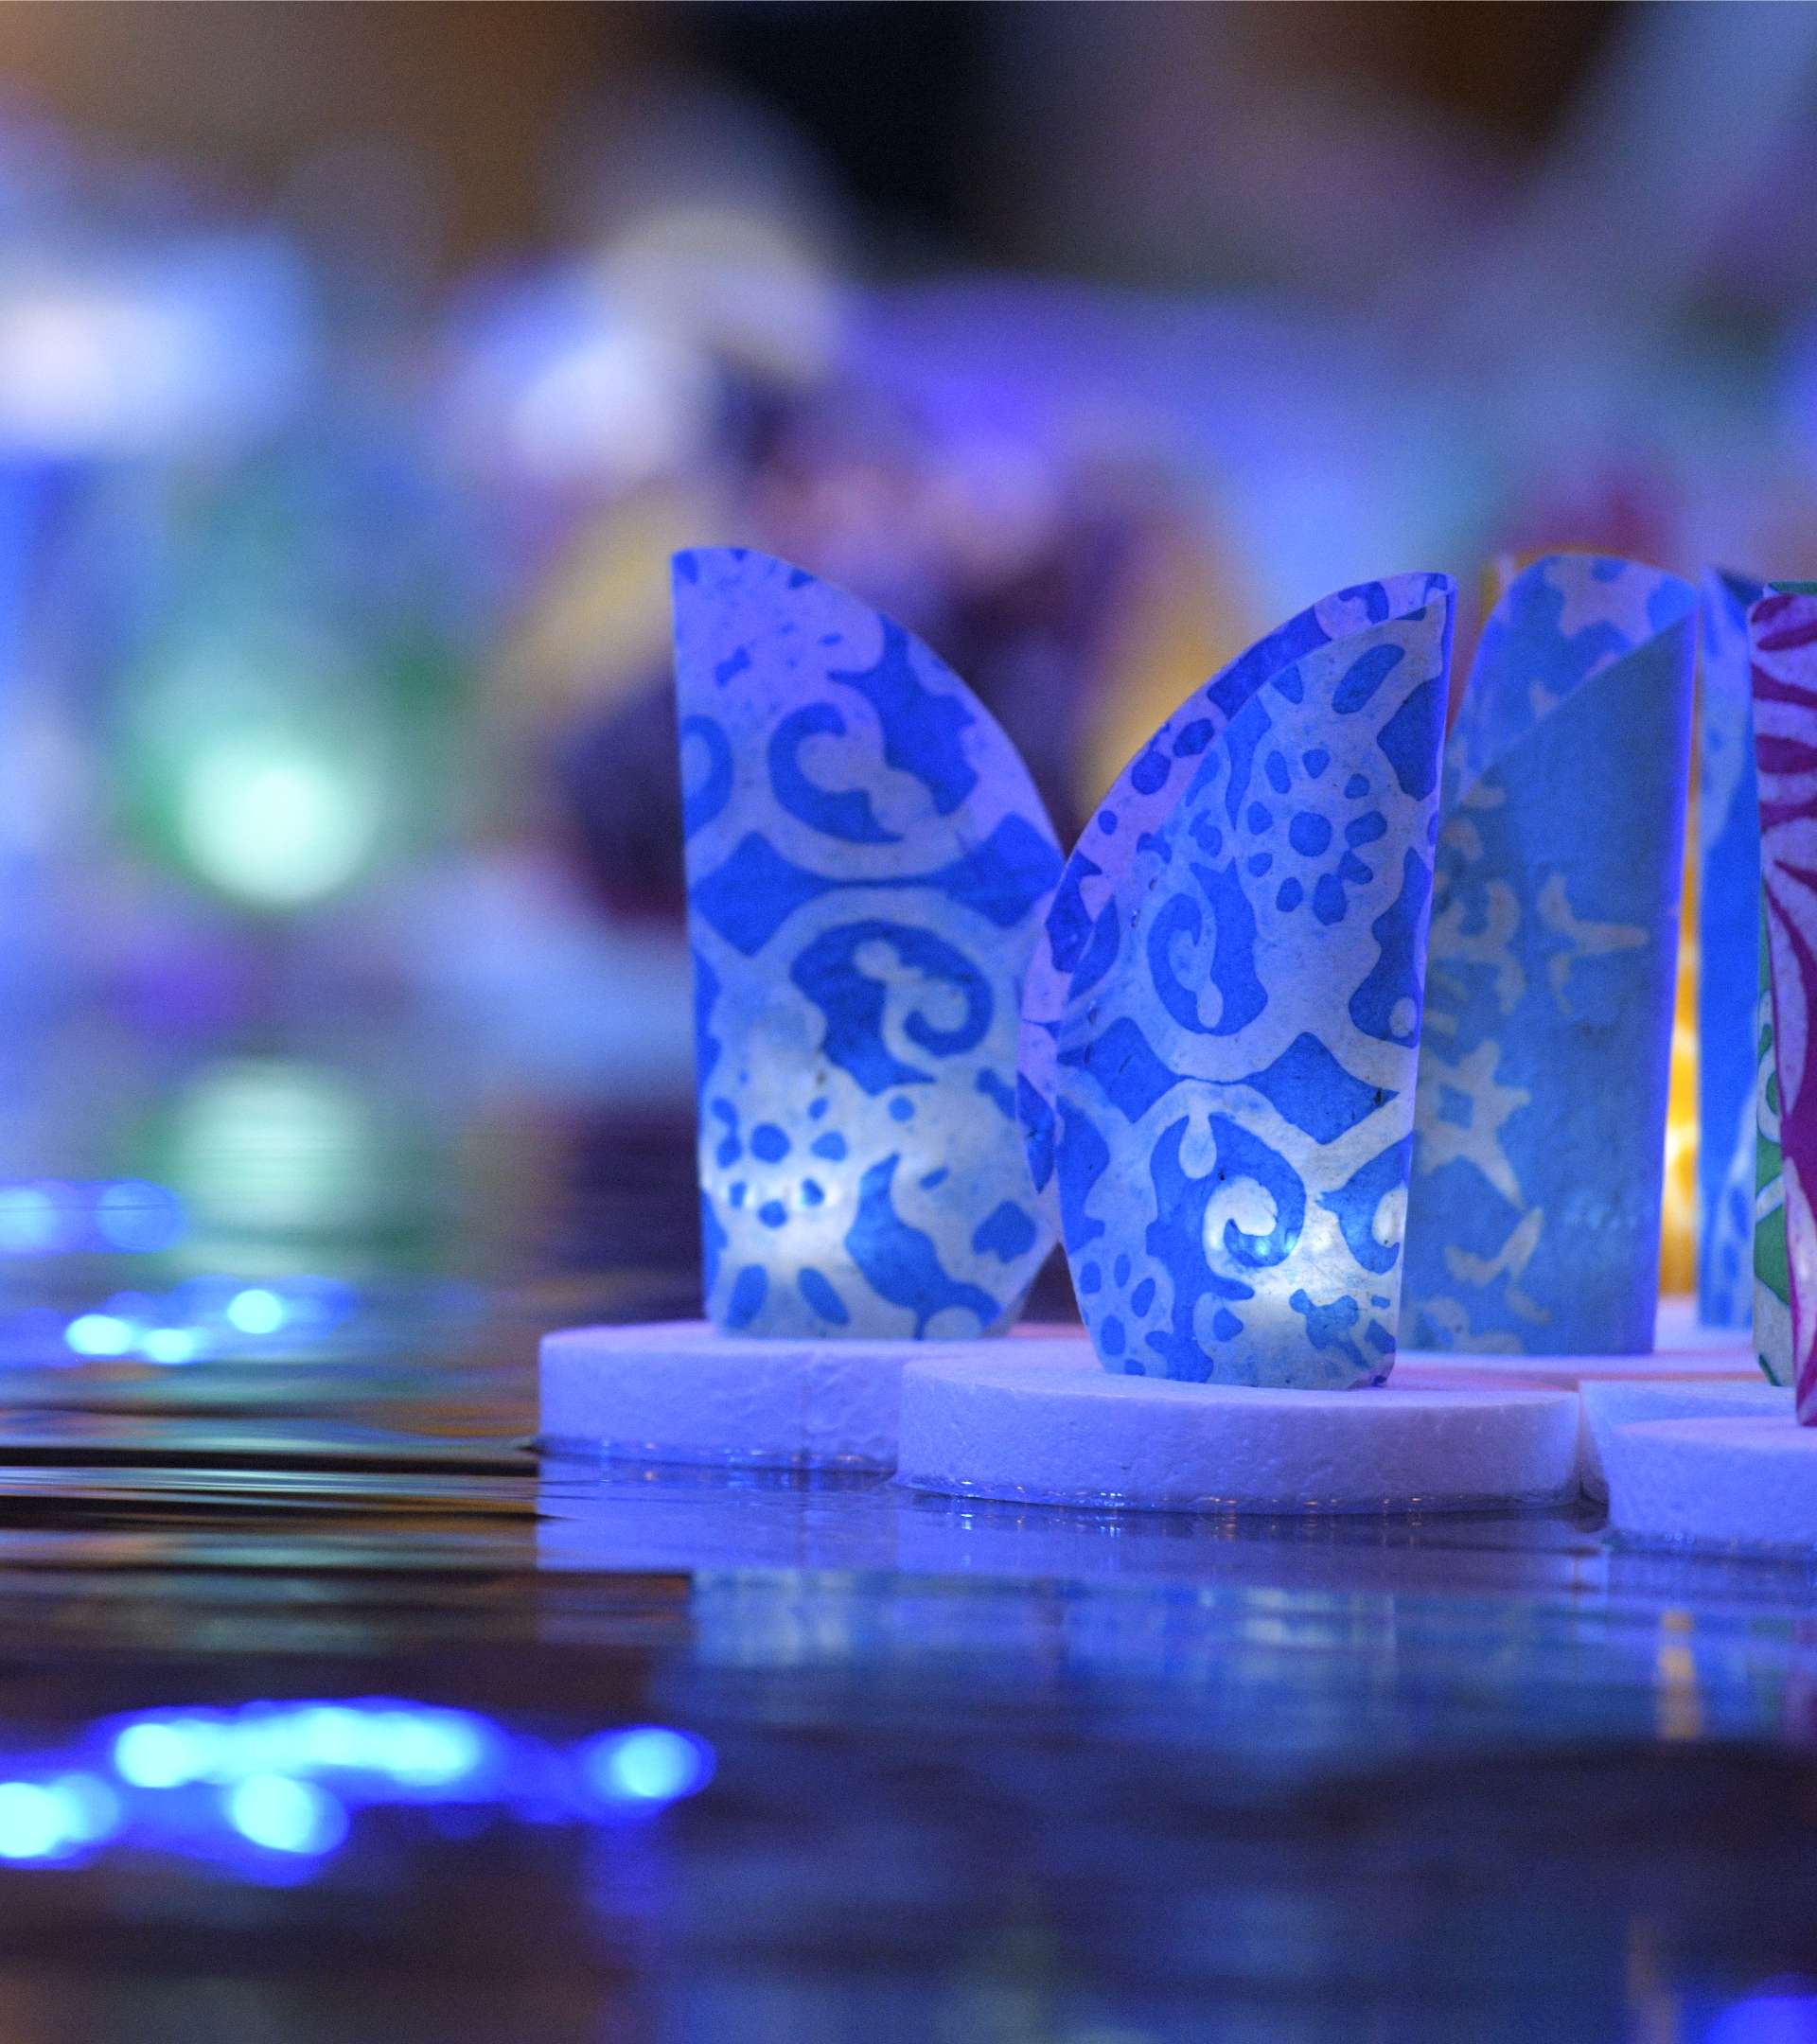 Glowing, colorful lanterns decorated with ornamental patterns float on calm water.